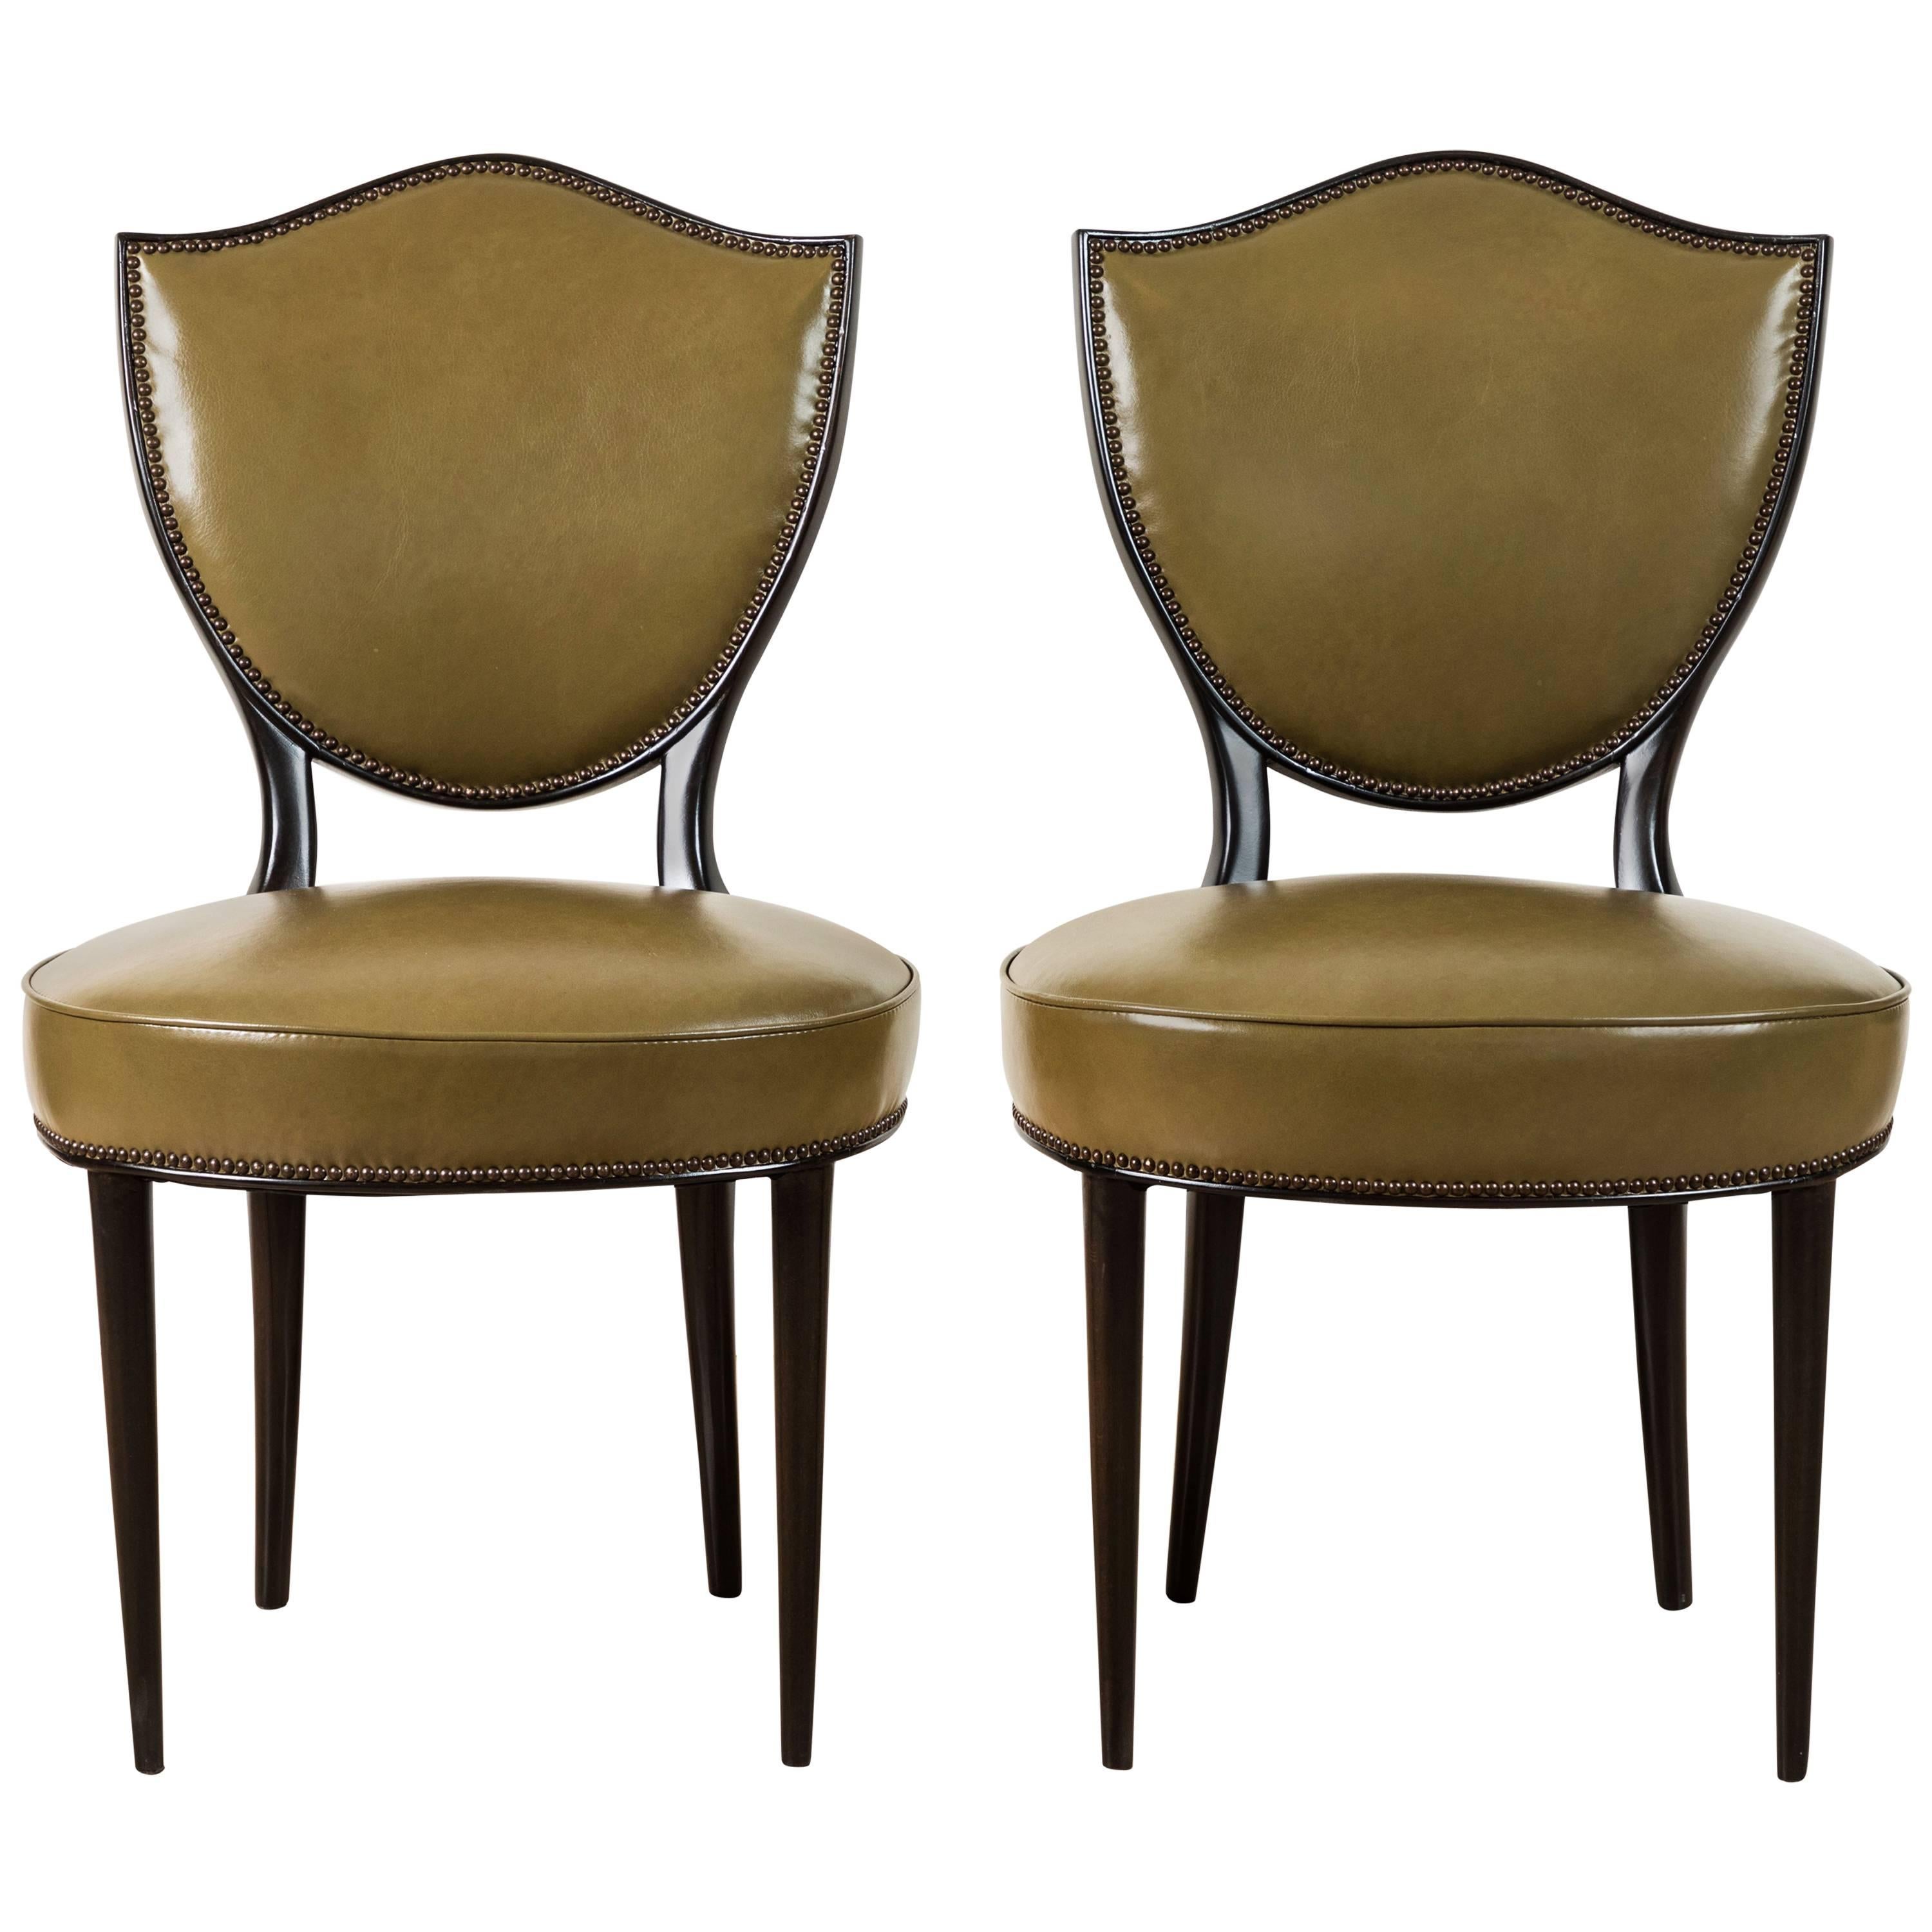 Pair of Shield Back Sitting Chairs by Grosfeld House